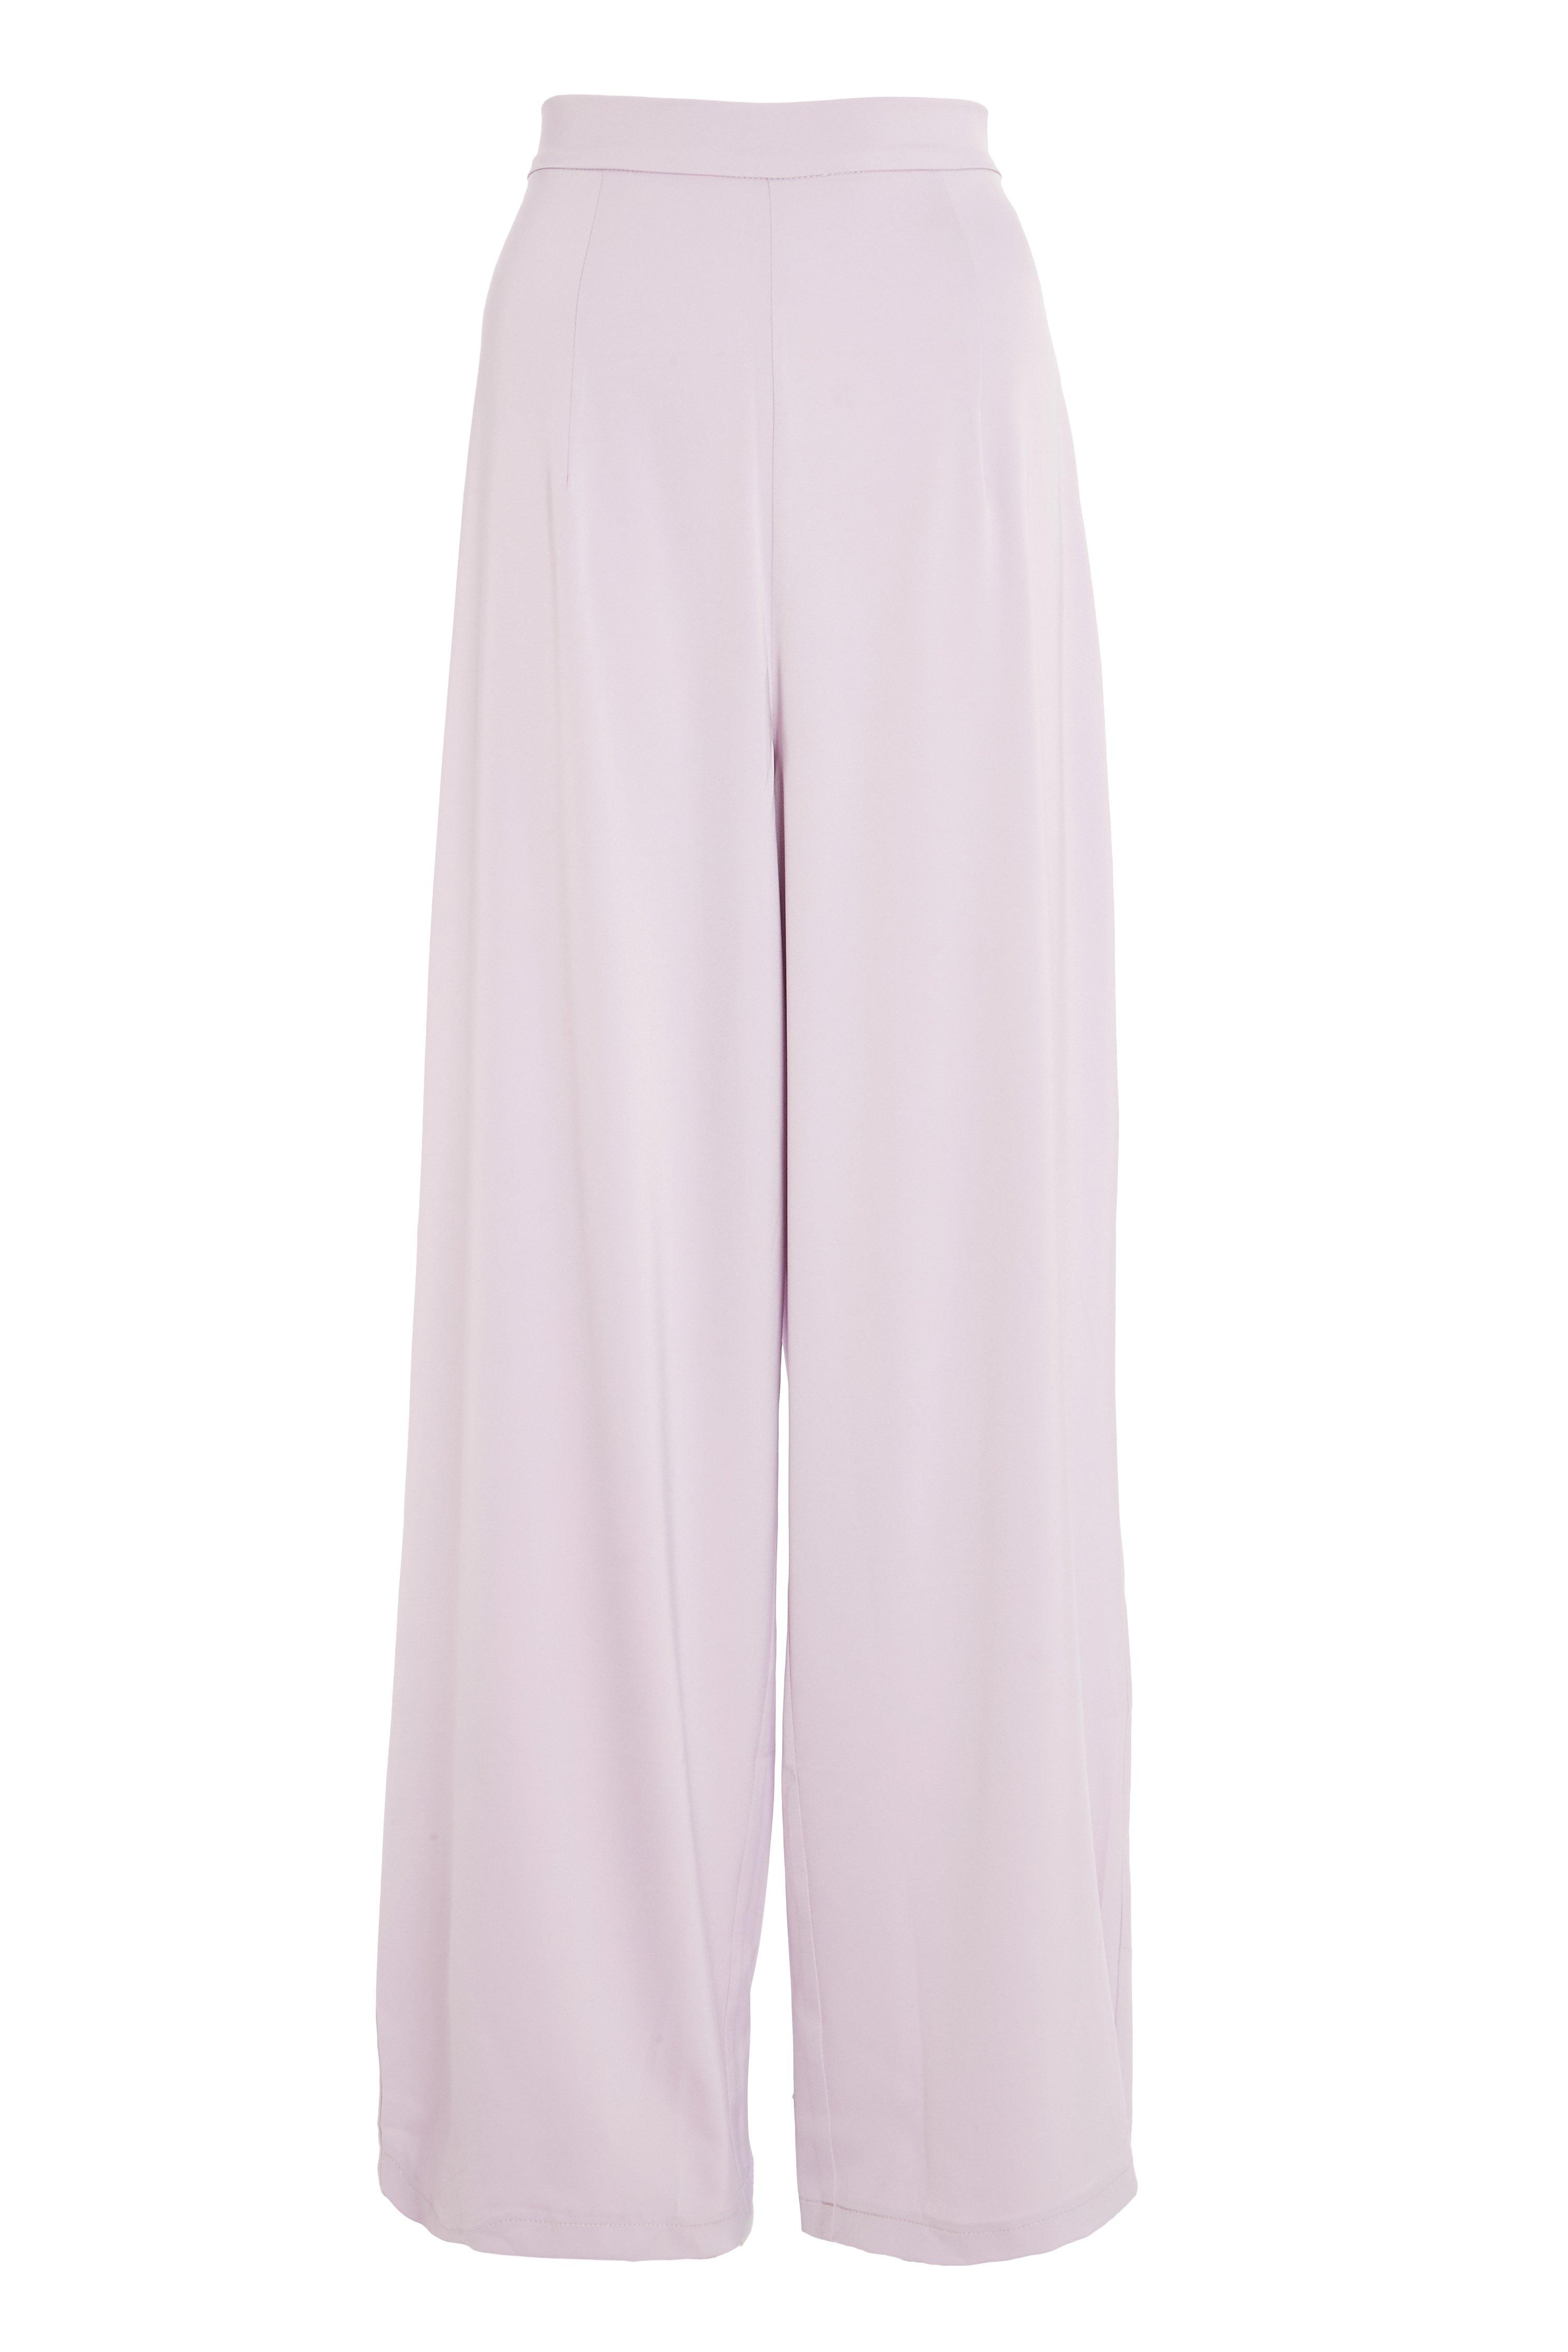 Lilac Satin Palazzo Trousers - Quiz Clothing